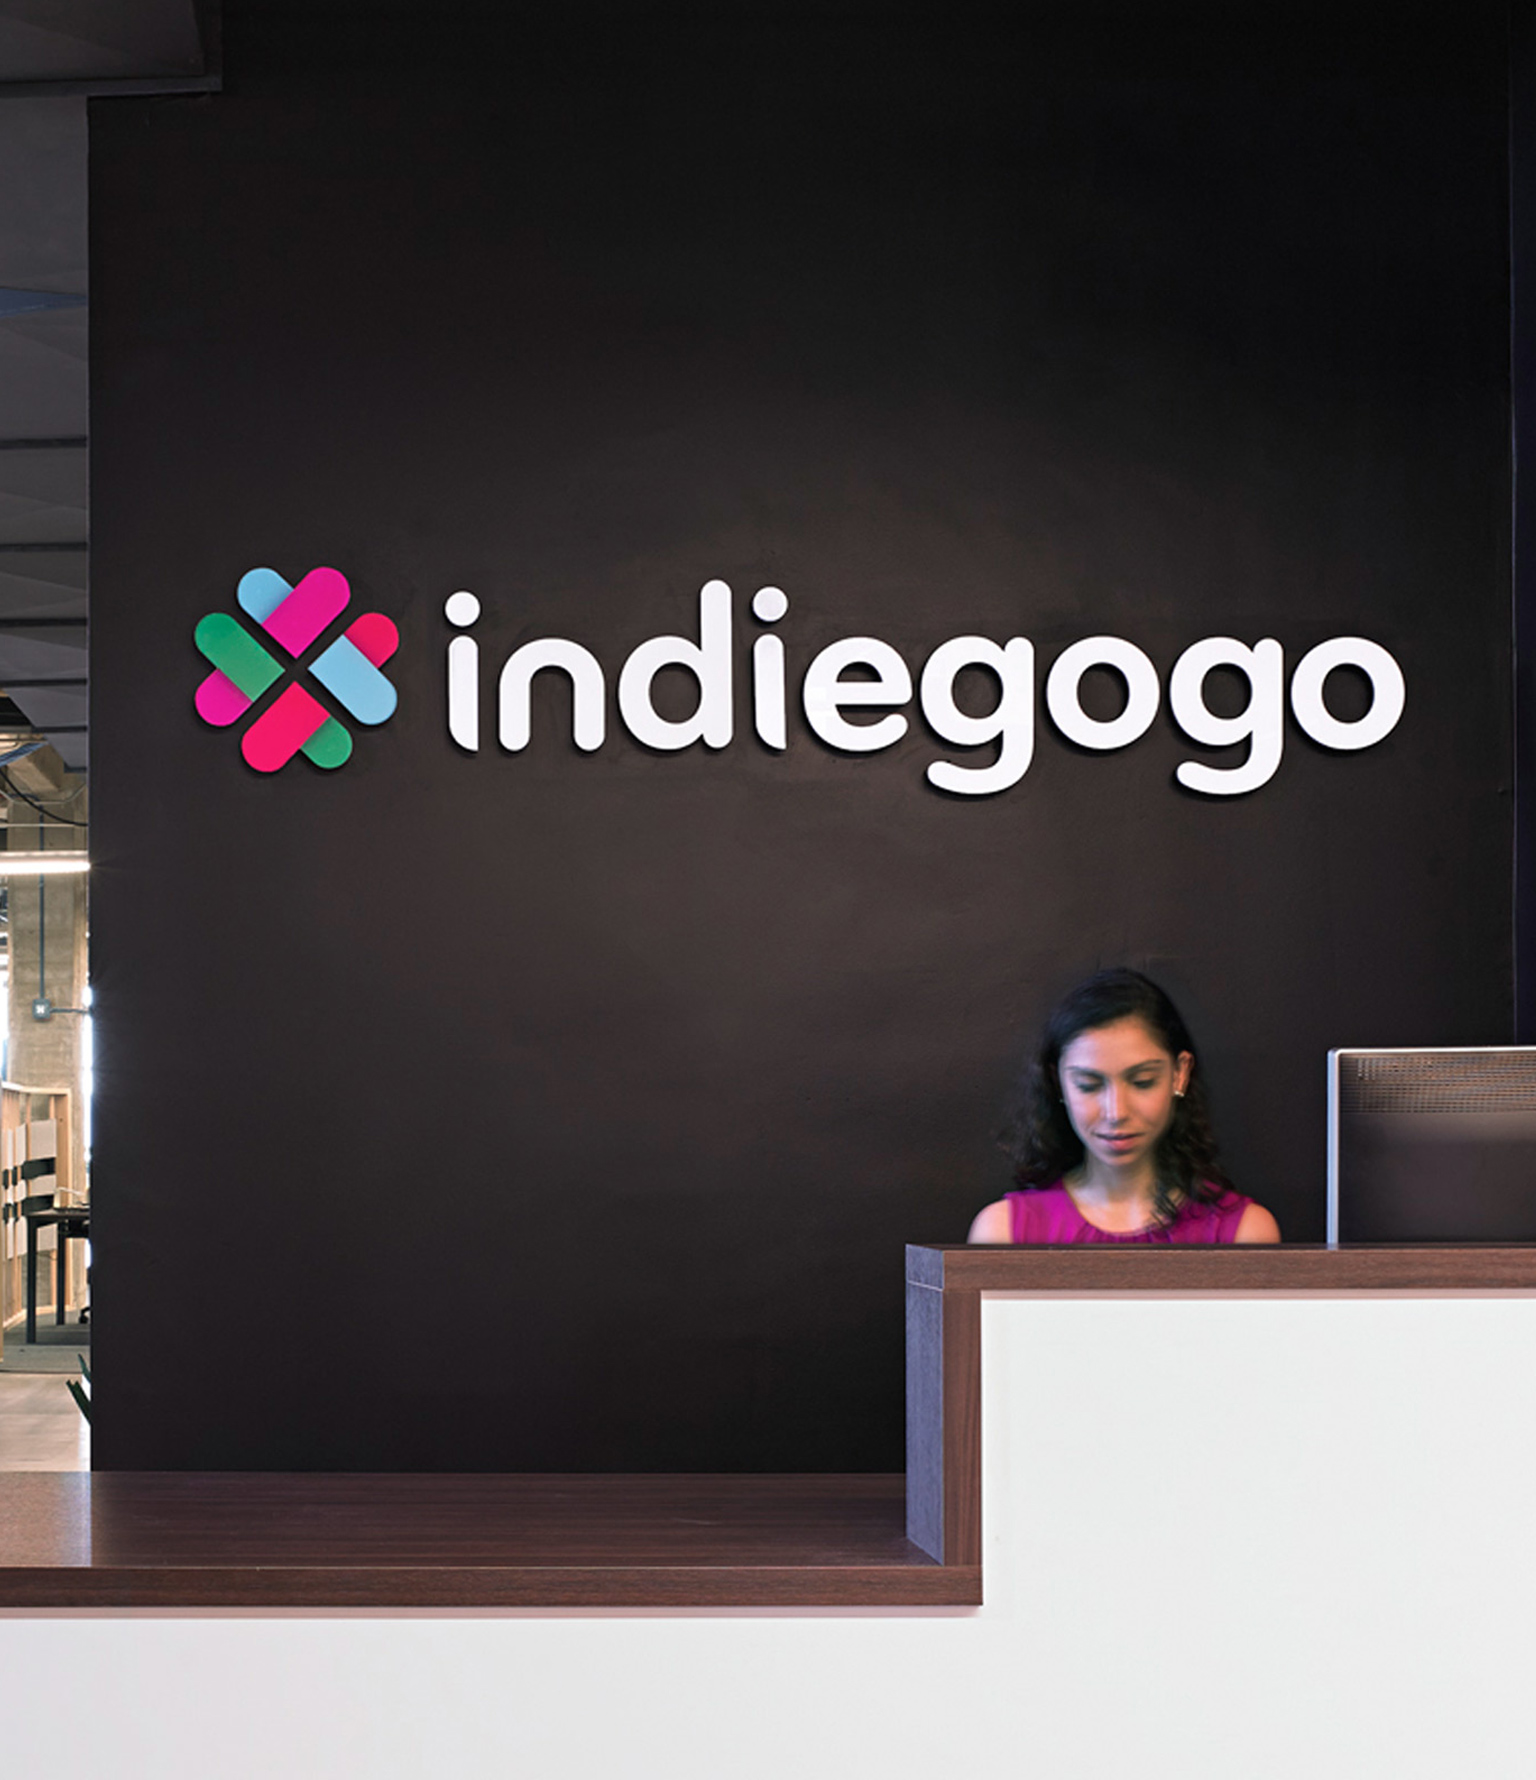 indiegogo offices reception desk with people working at table and logo signage on wall